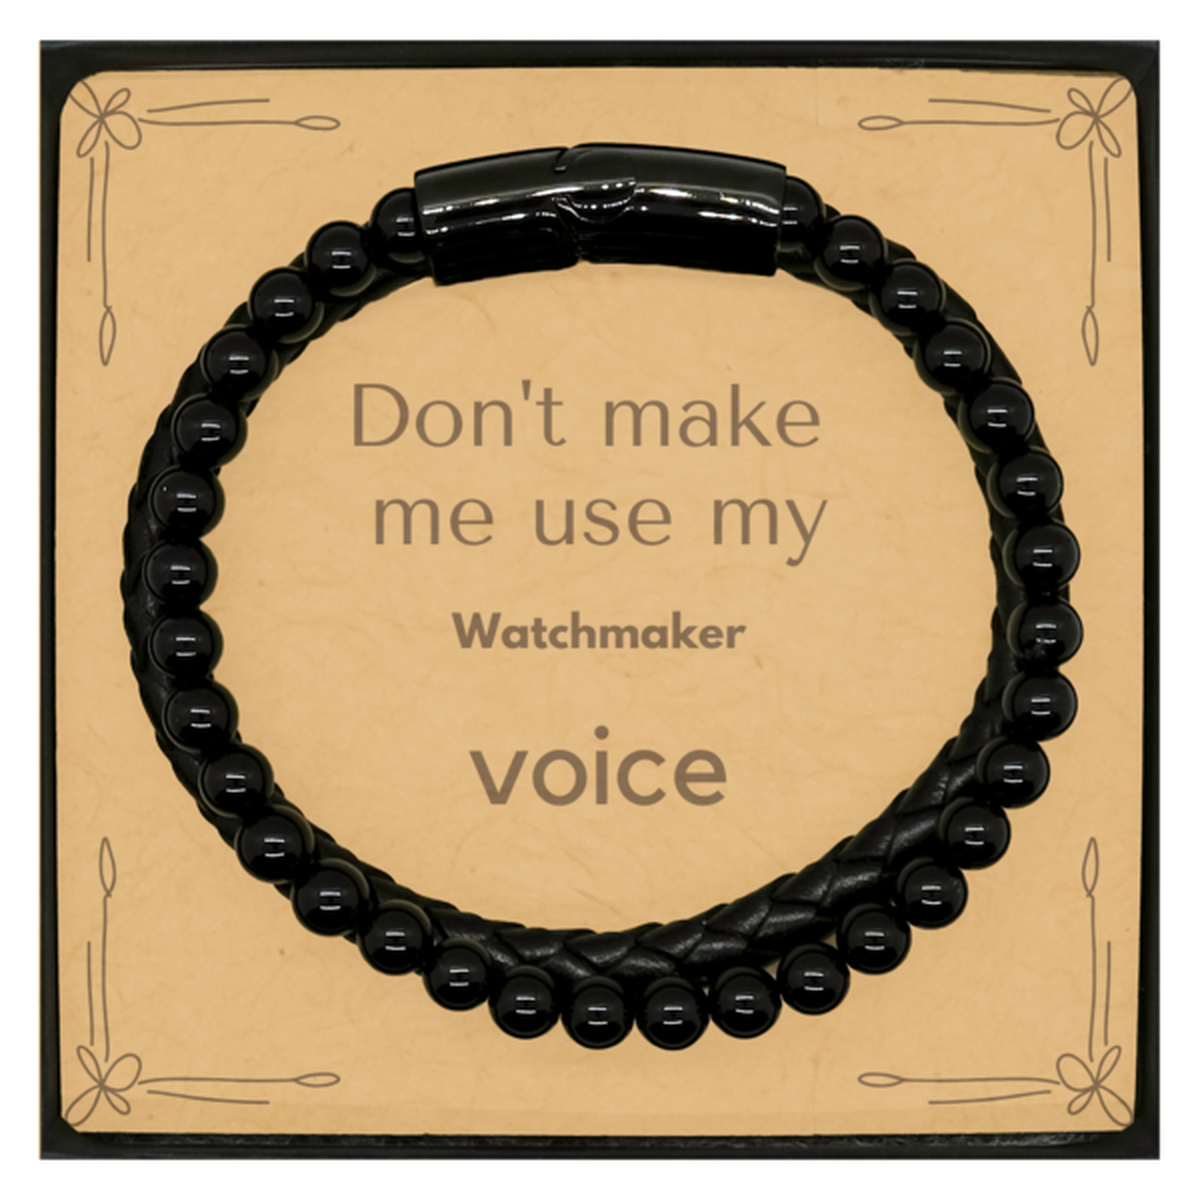 Don't make me use my Watchmaker voice, Sarcasm Watchmaker Card Gifts, Christmas Watchmaker Stone Leather Bracelets Birthday Unique Gifts For Watchmaker Coworkers, Men, Women, Colleague, Friends